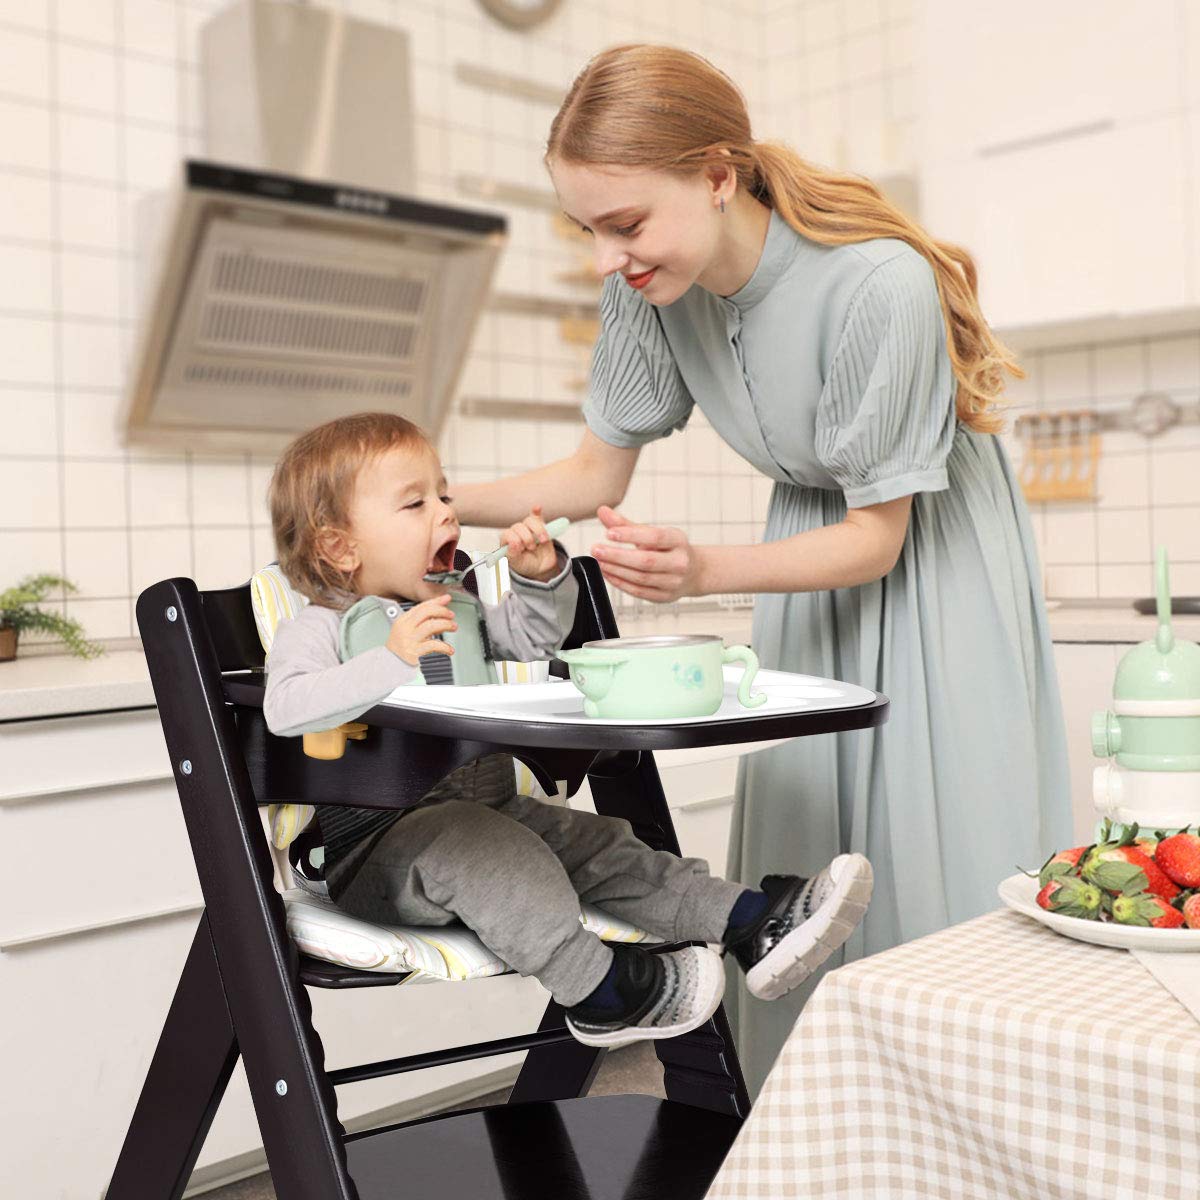 Costzon Wooden High Chair, Baby Dining Chair with Adjustable Height, Removable Tray, 5-Point Safety Harness